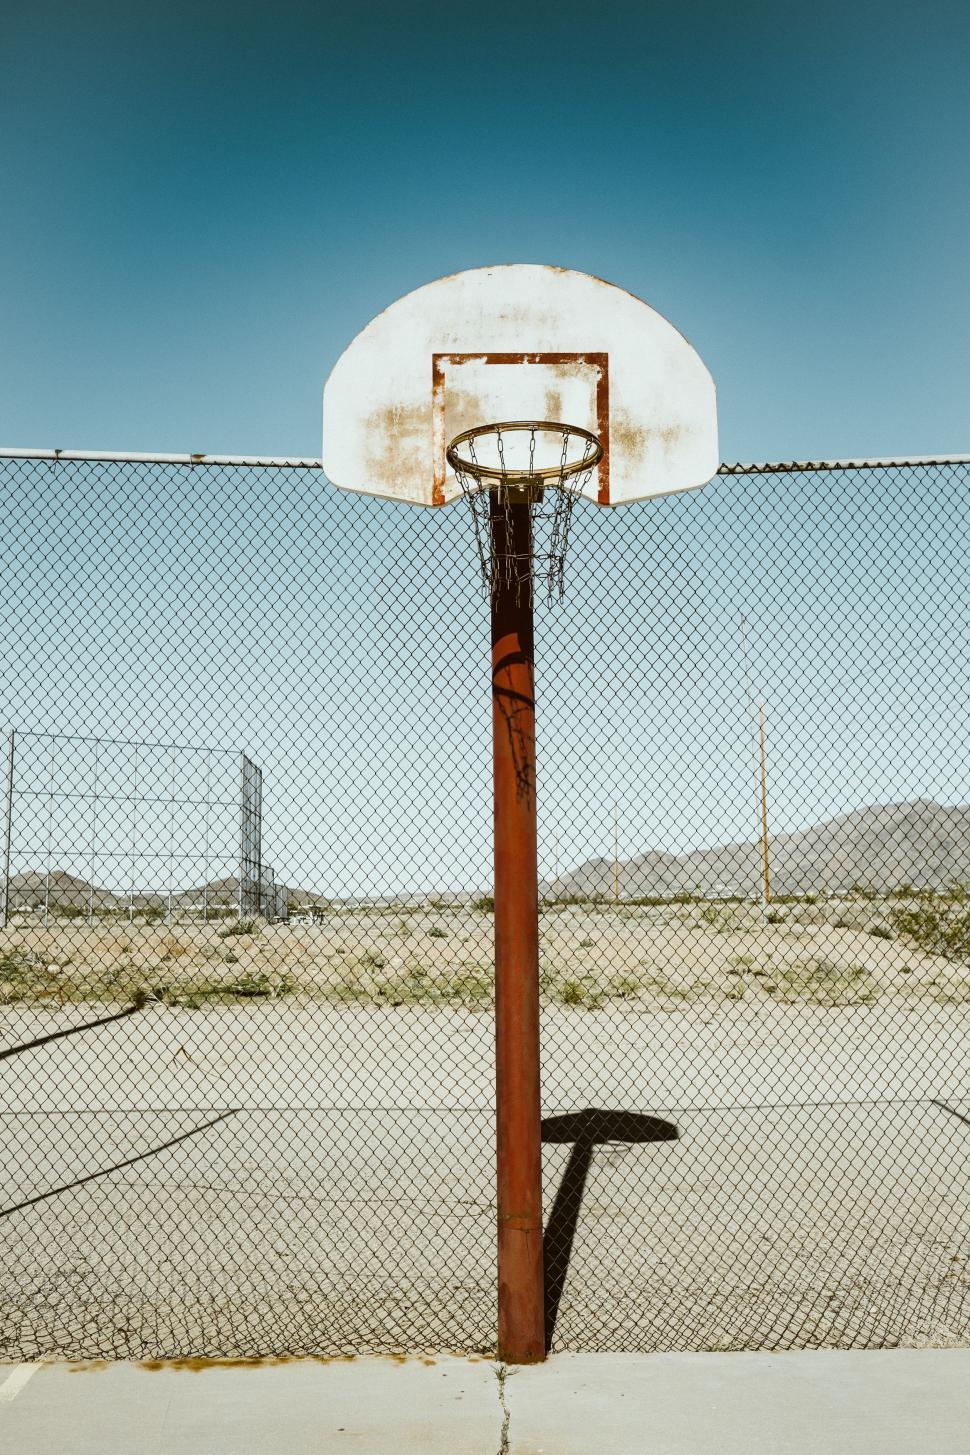 Free Image of Basketball Hoop in the Middle of a Basketball Court 